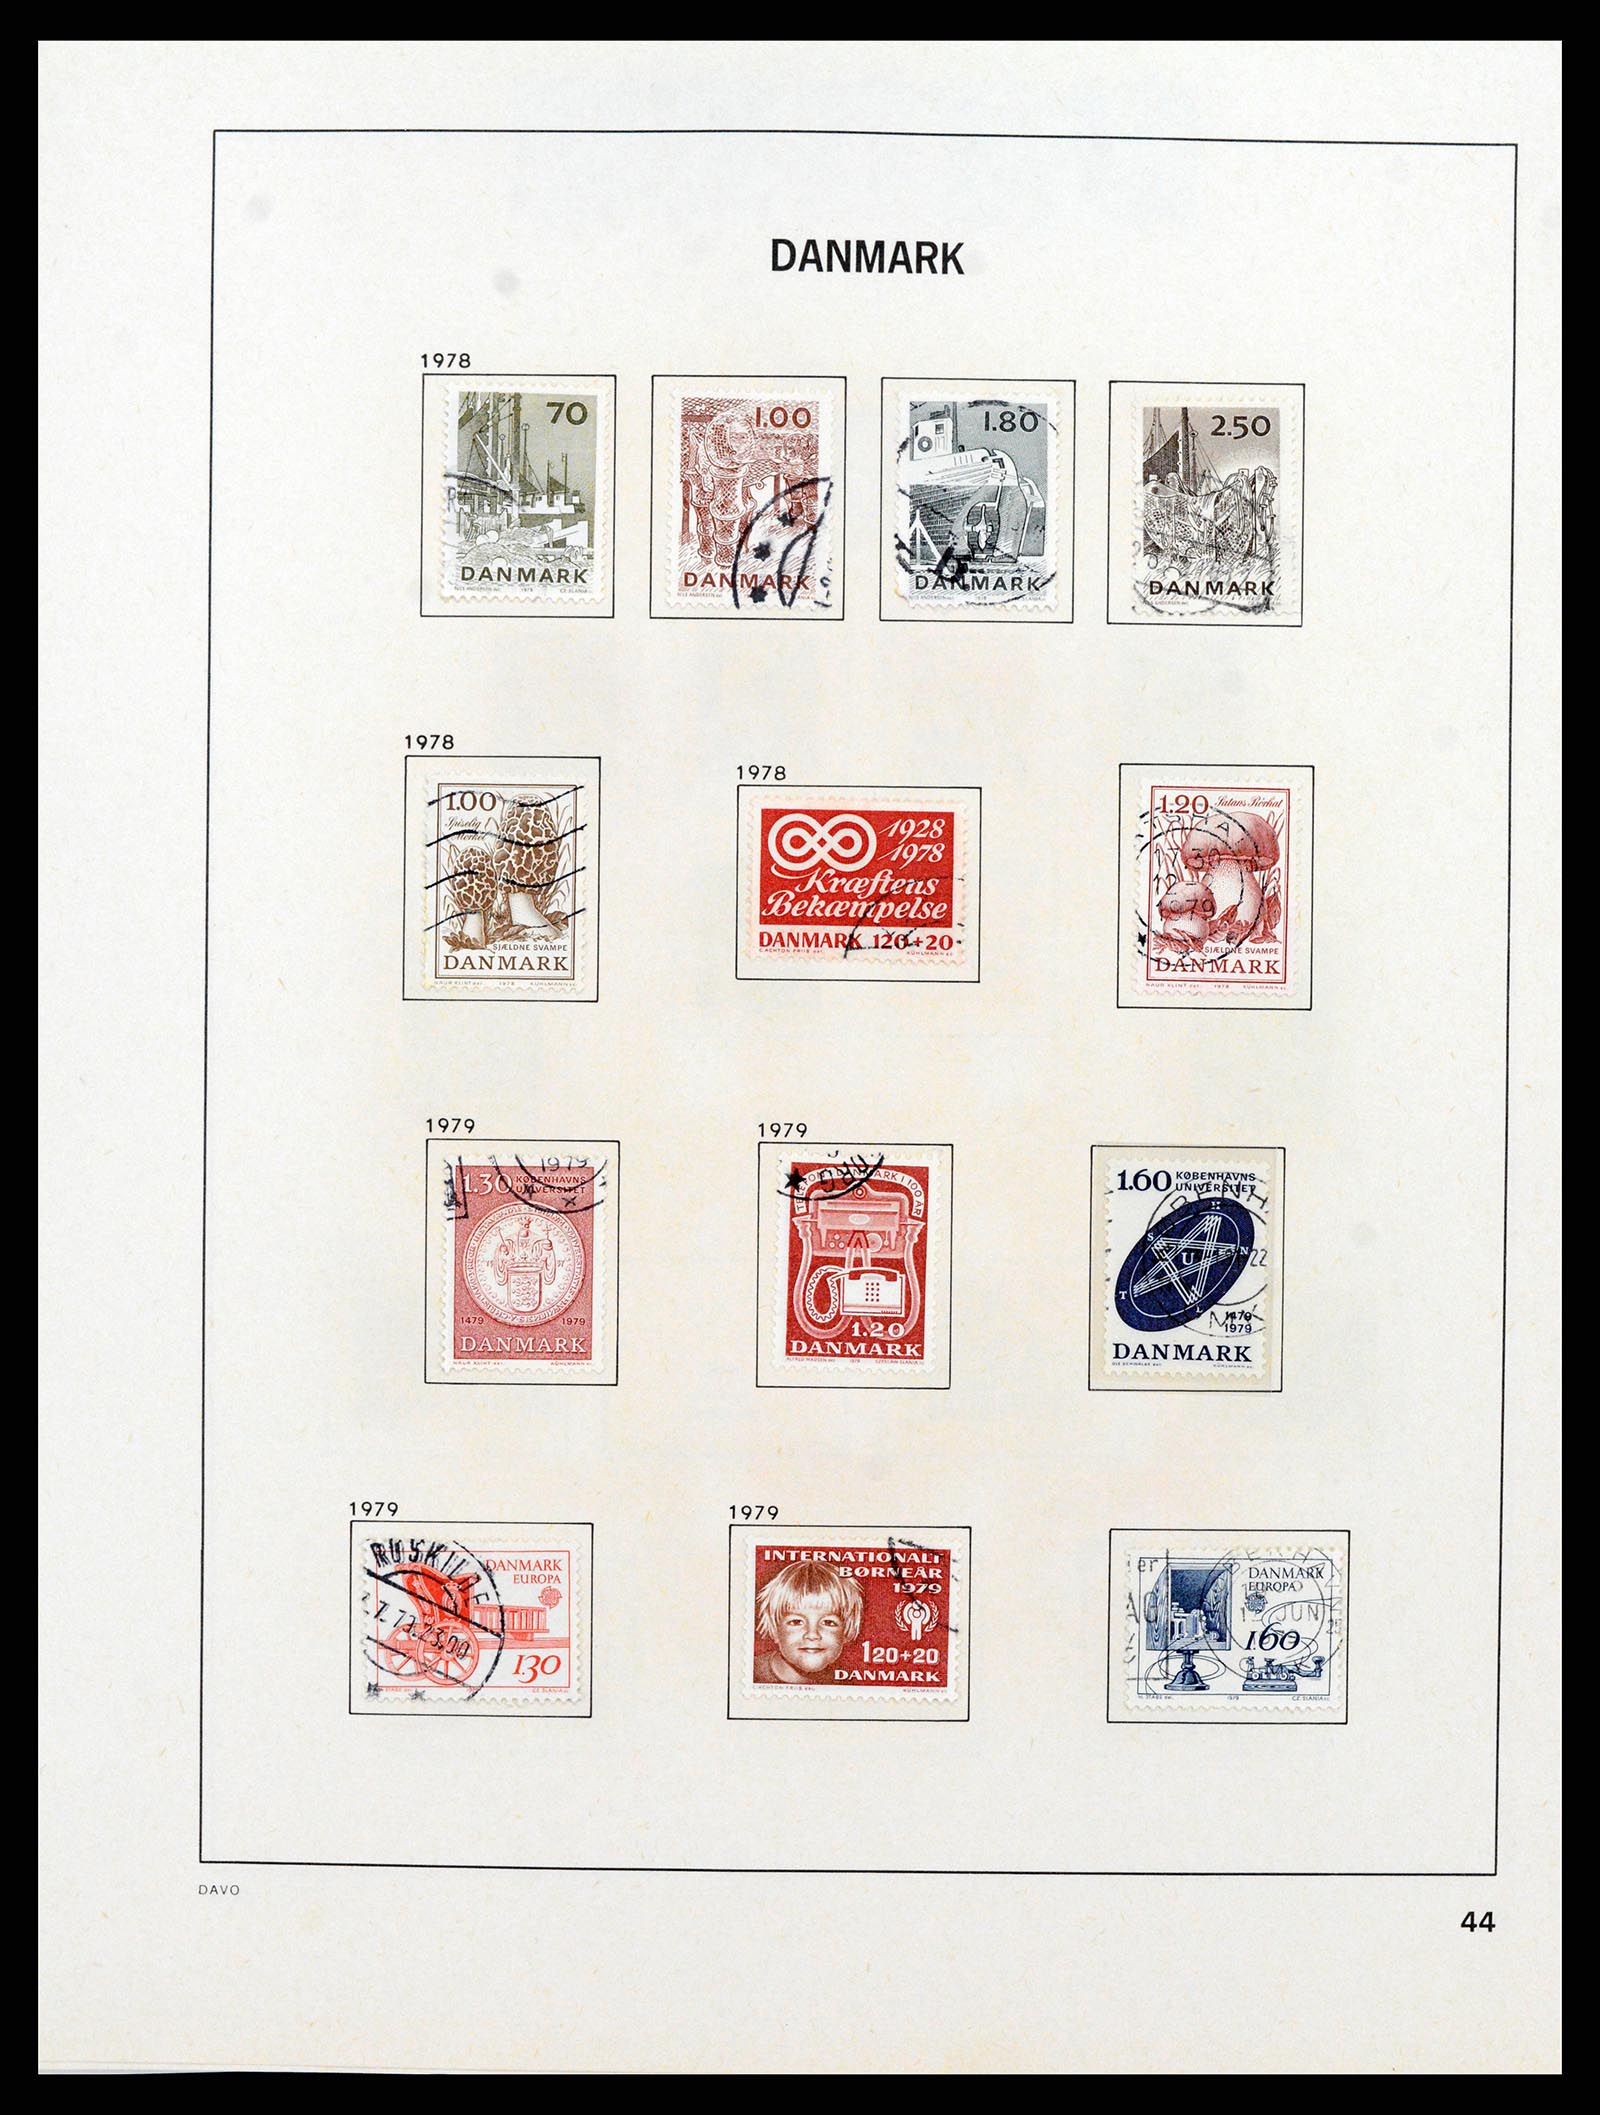 38077 0044 - Stamp collection 38077 Denmark 1851-1985.